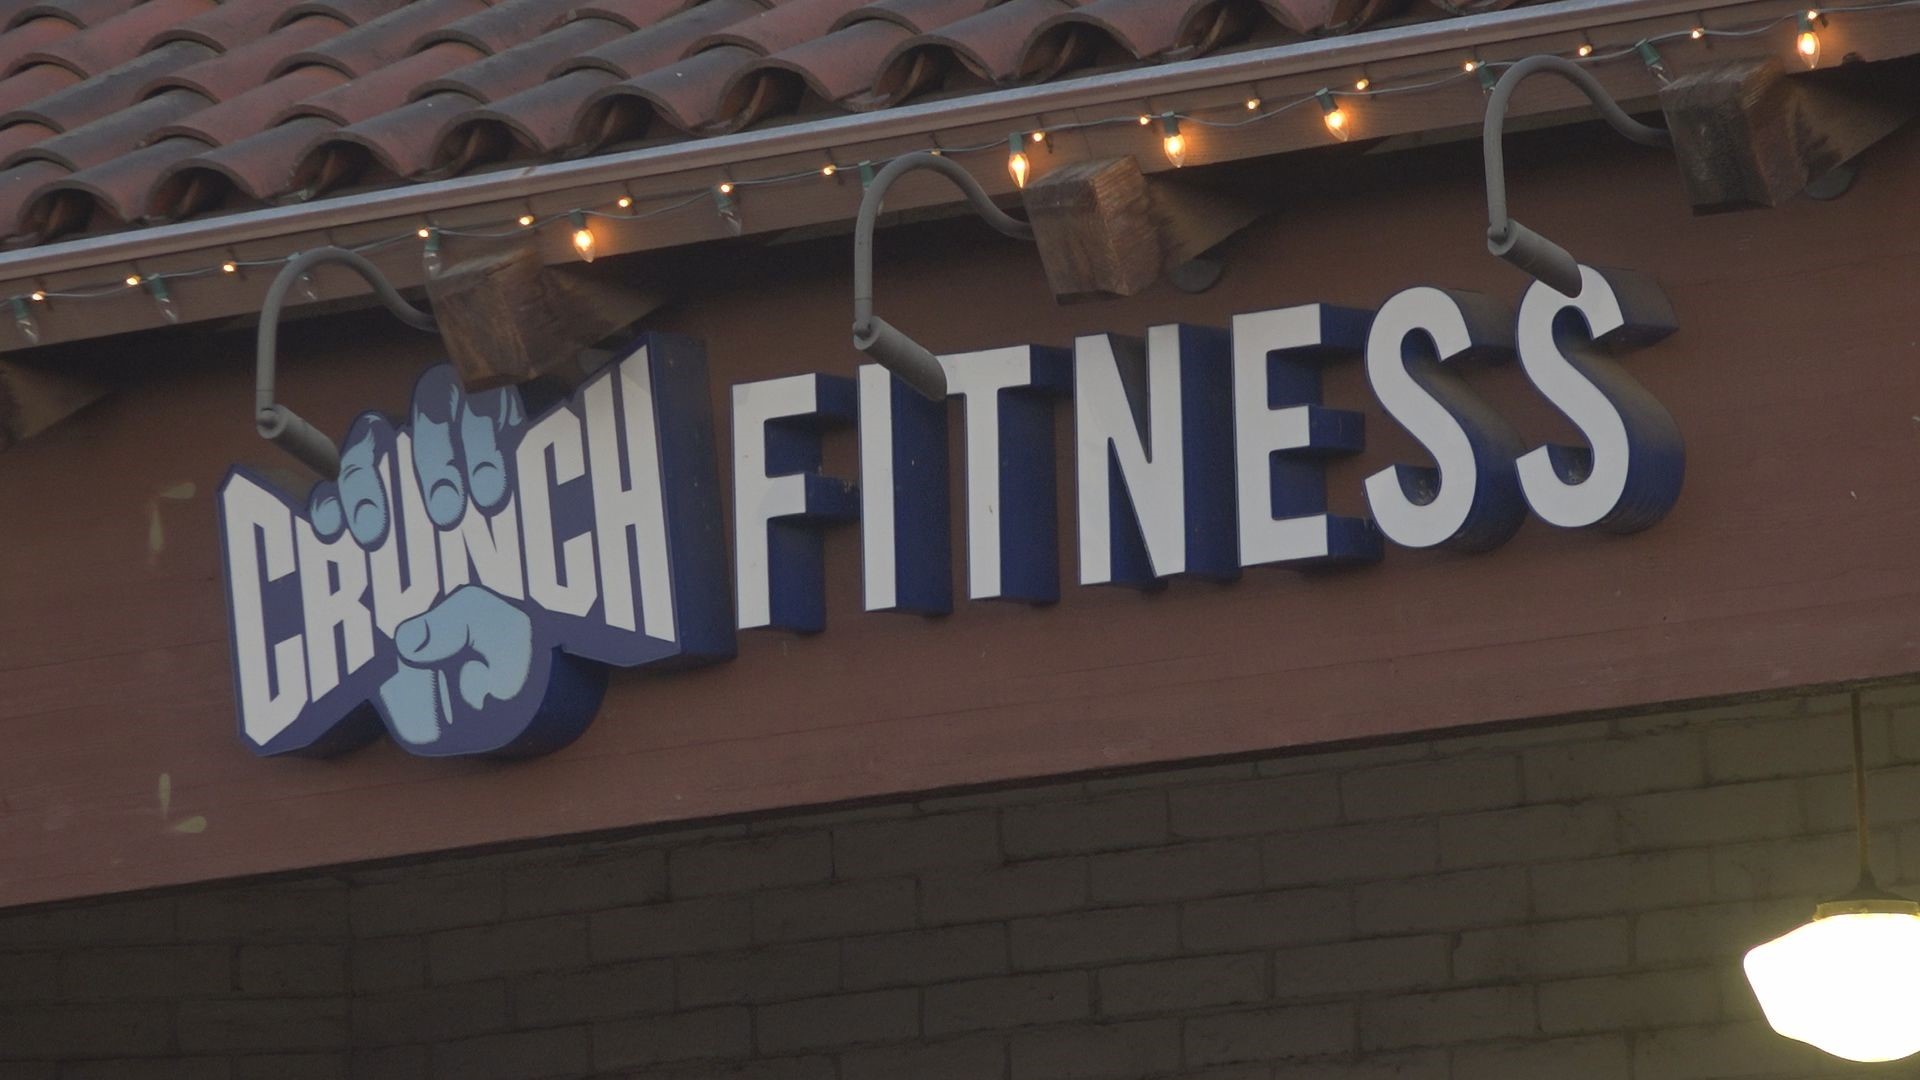 Elk Grove Crunch Fitness manager, Andrew Rodriguez, told ABC 10 the gym will move operations outdoors.